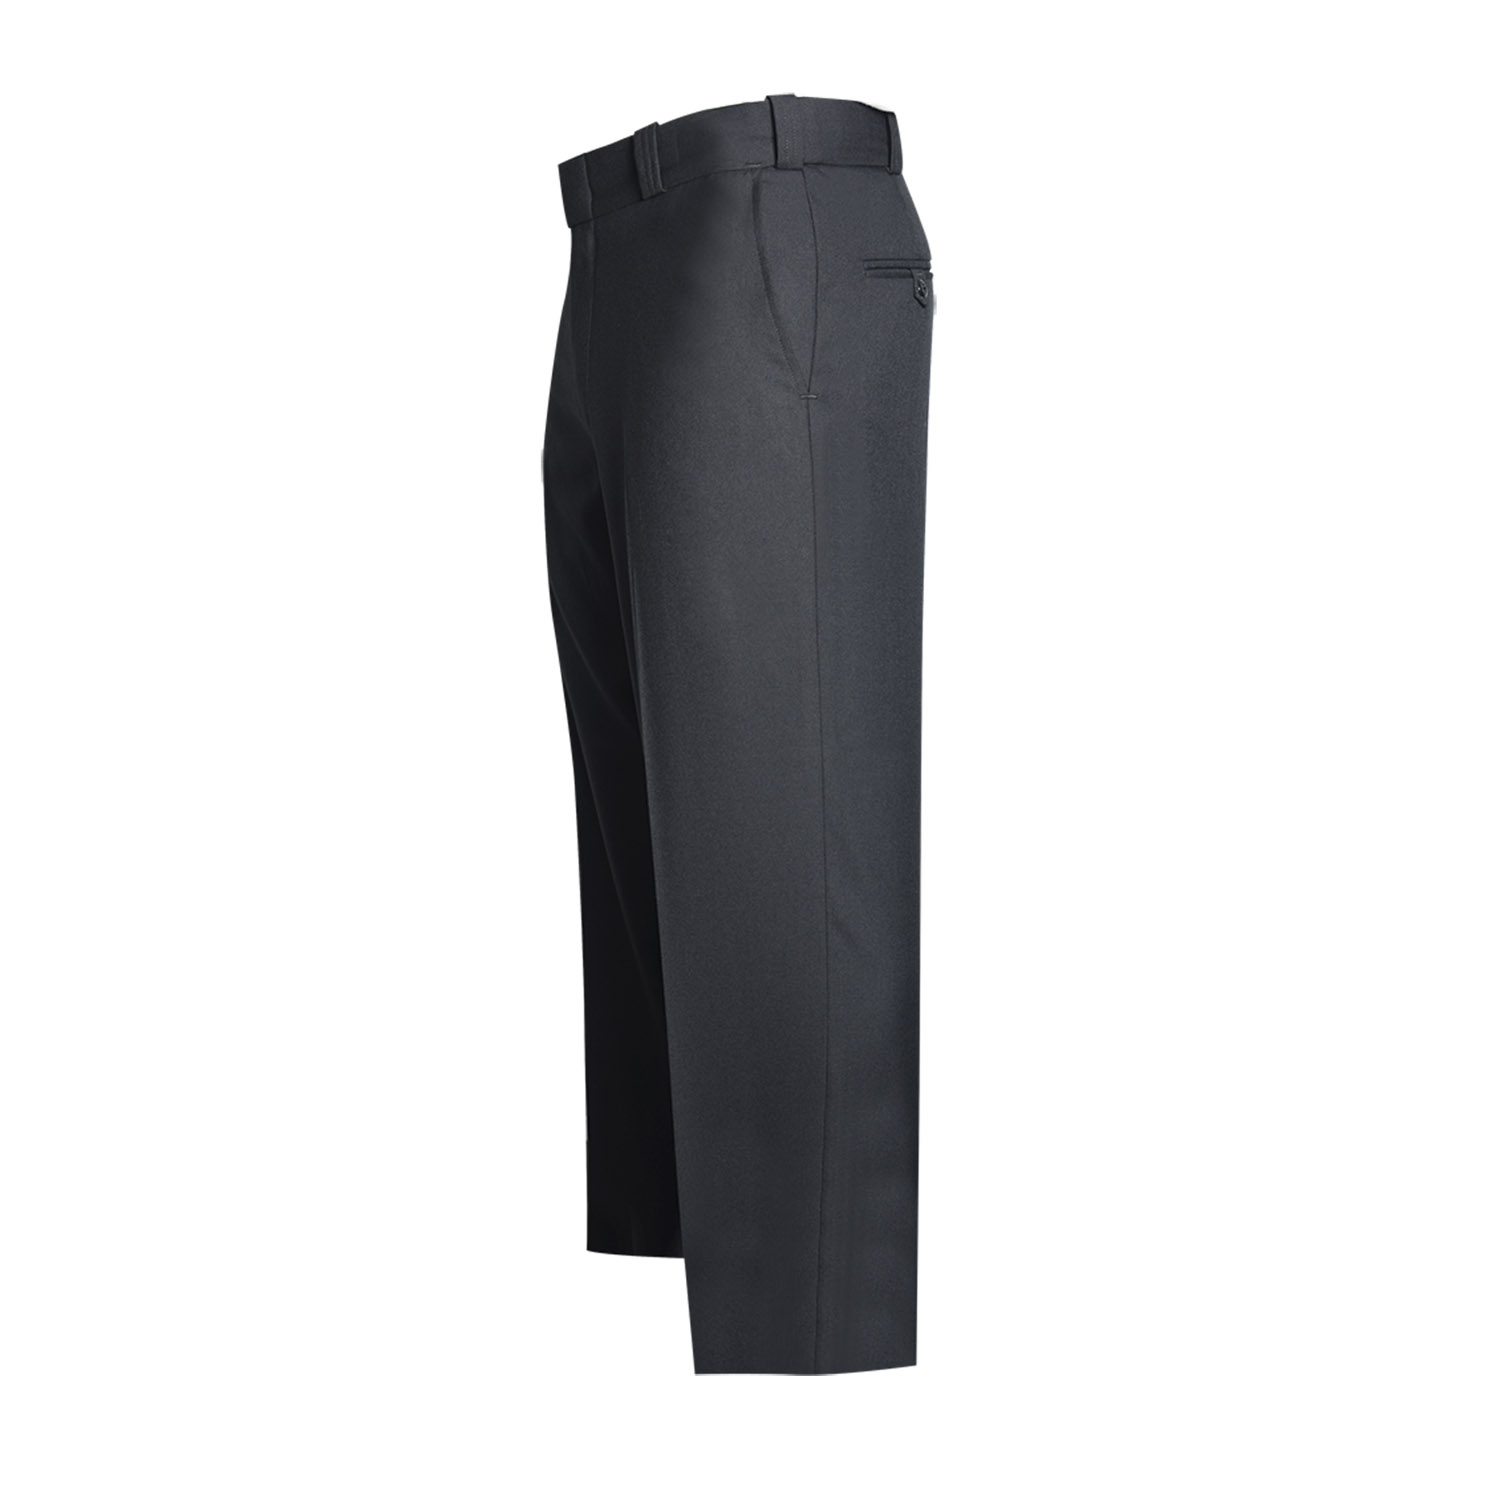 FLYING CROSS MEN'S POLYESTER COTTON TROUSERS WITH FLEX WAIST